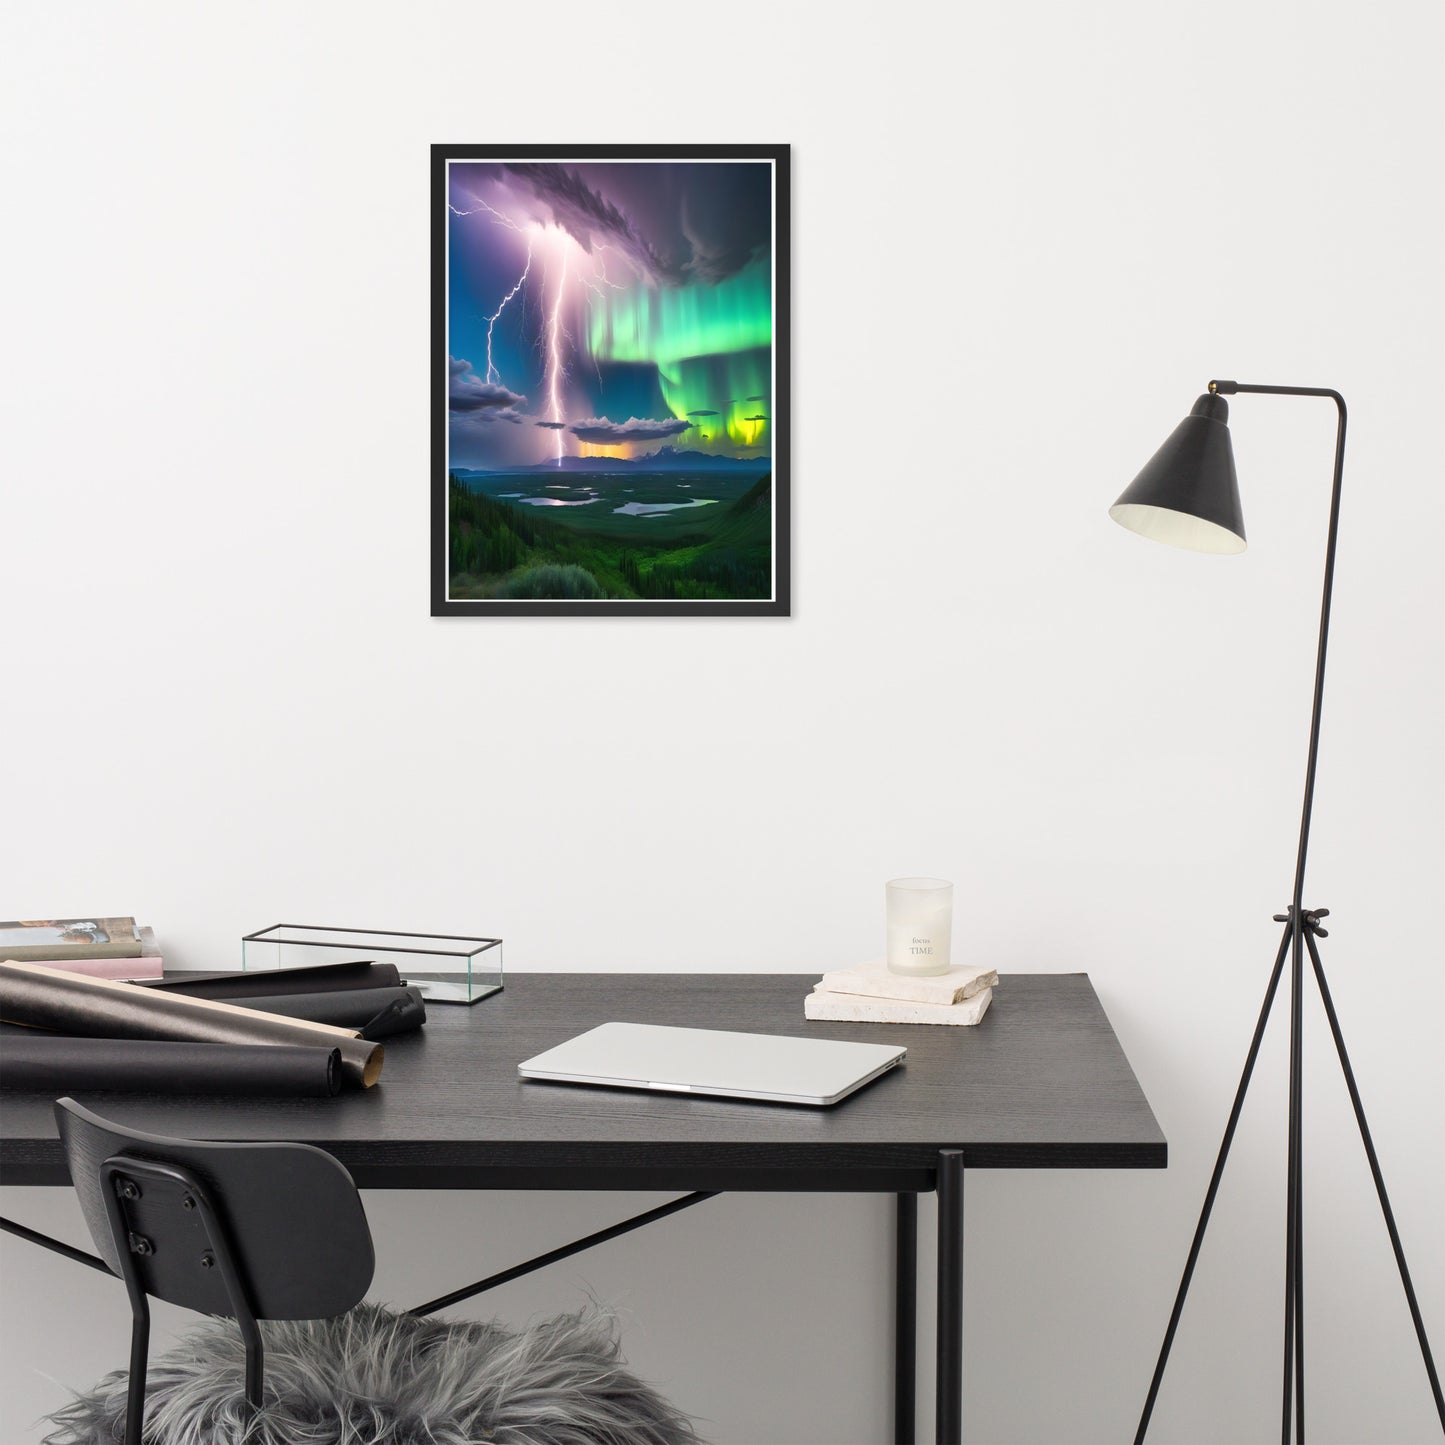 Enchanting Aurora Borealis Framed Posters - Multi Size Personalized Northern Light View - Modern Wall Art - Perfect Aurora Lovers Gift 6